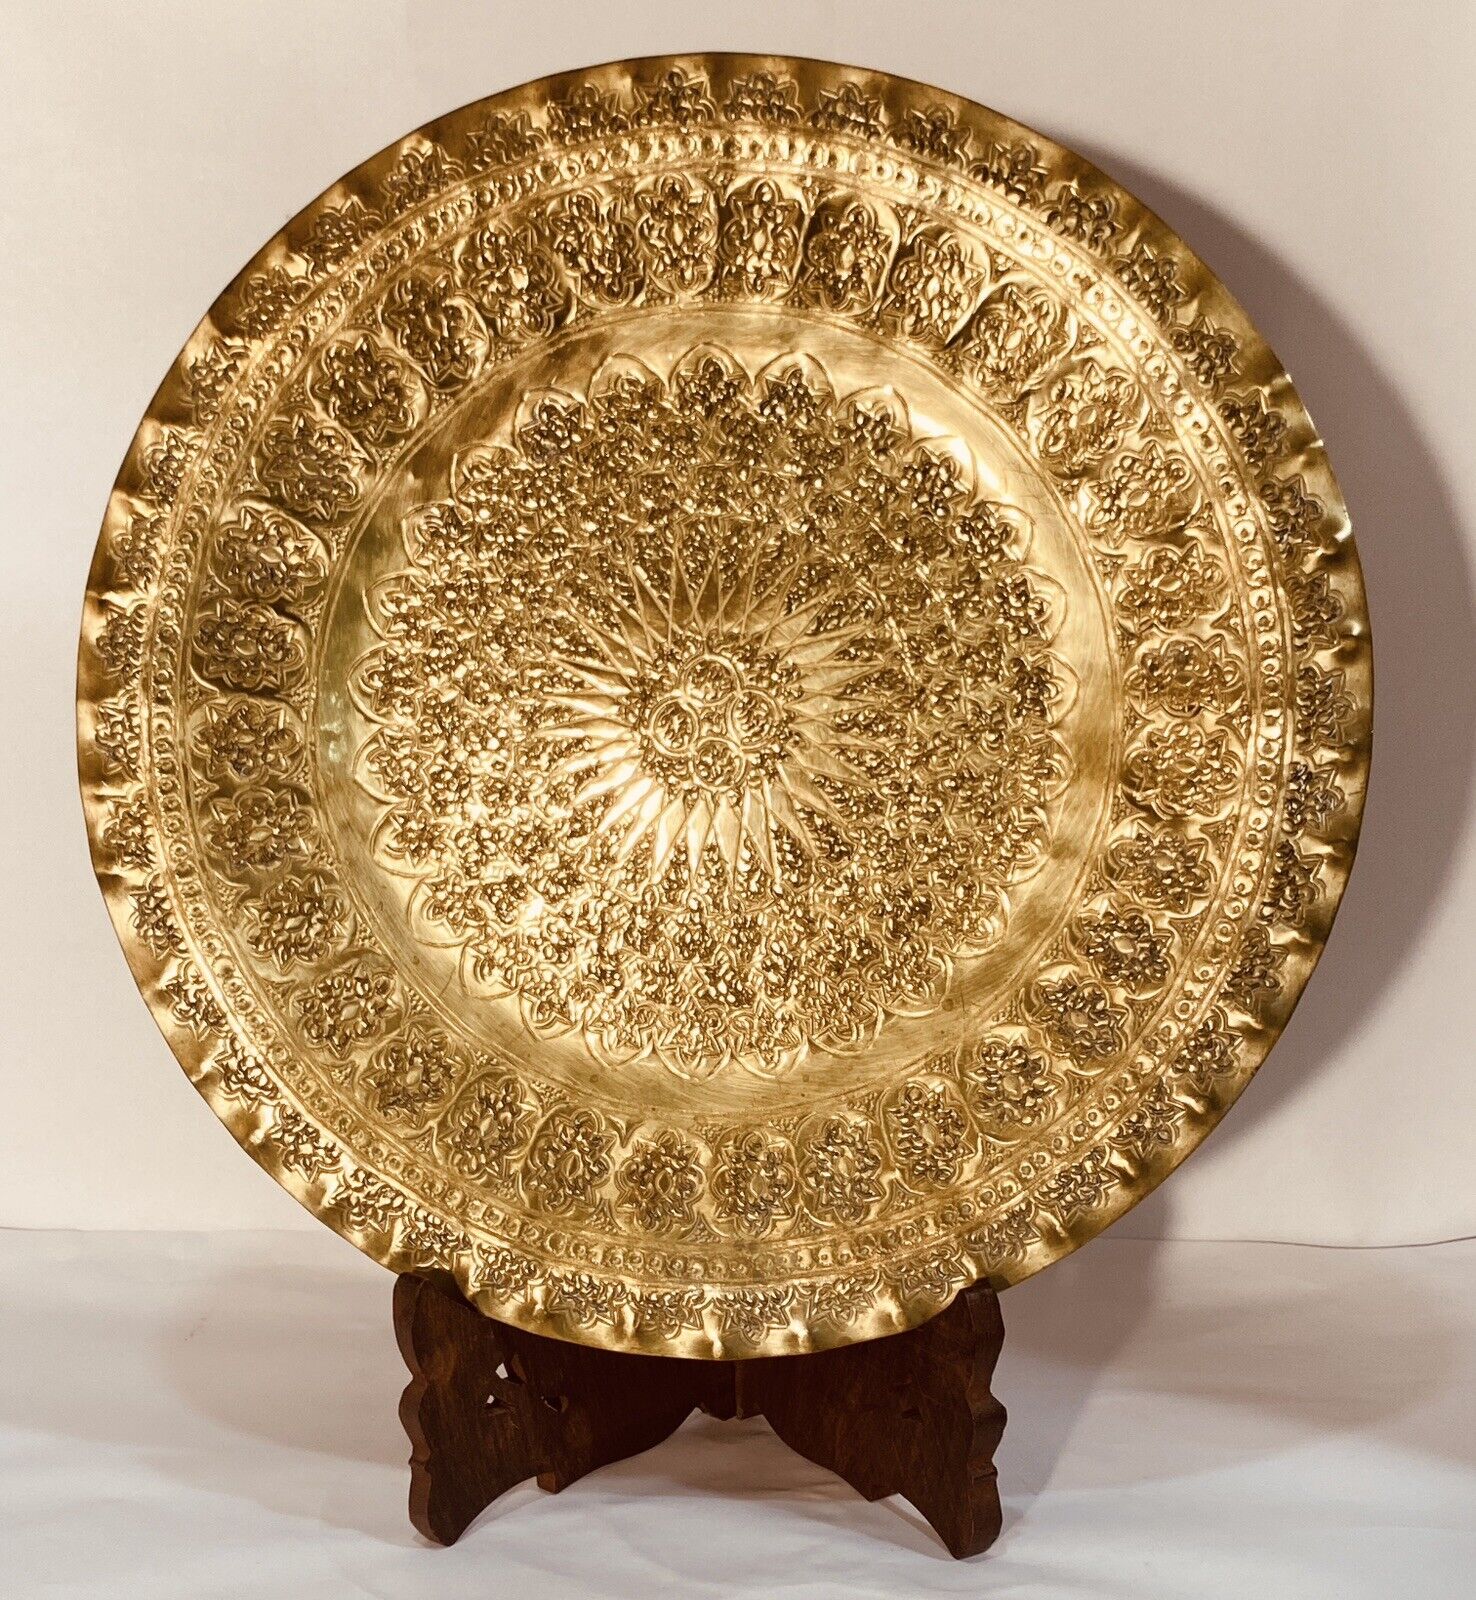 Moroccan Etched Brass Tray Round Hand Crafted 14” Sun Rays Design Shiny VTG